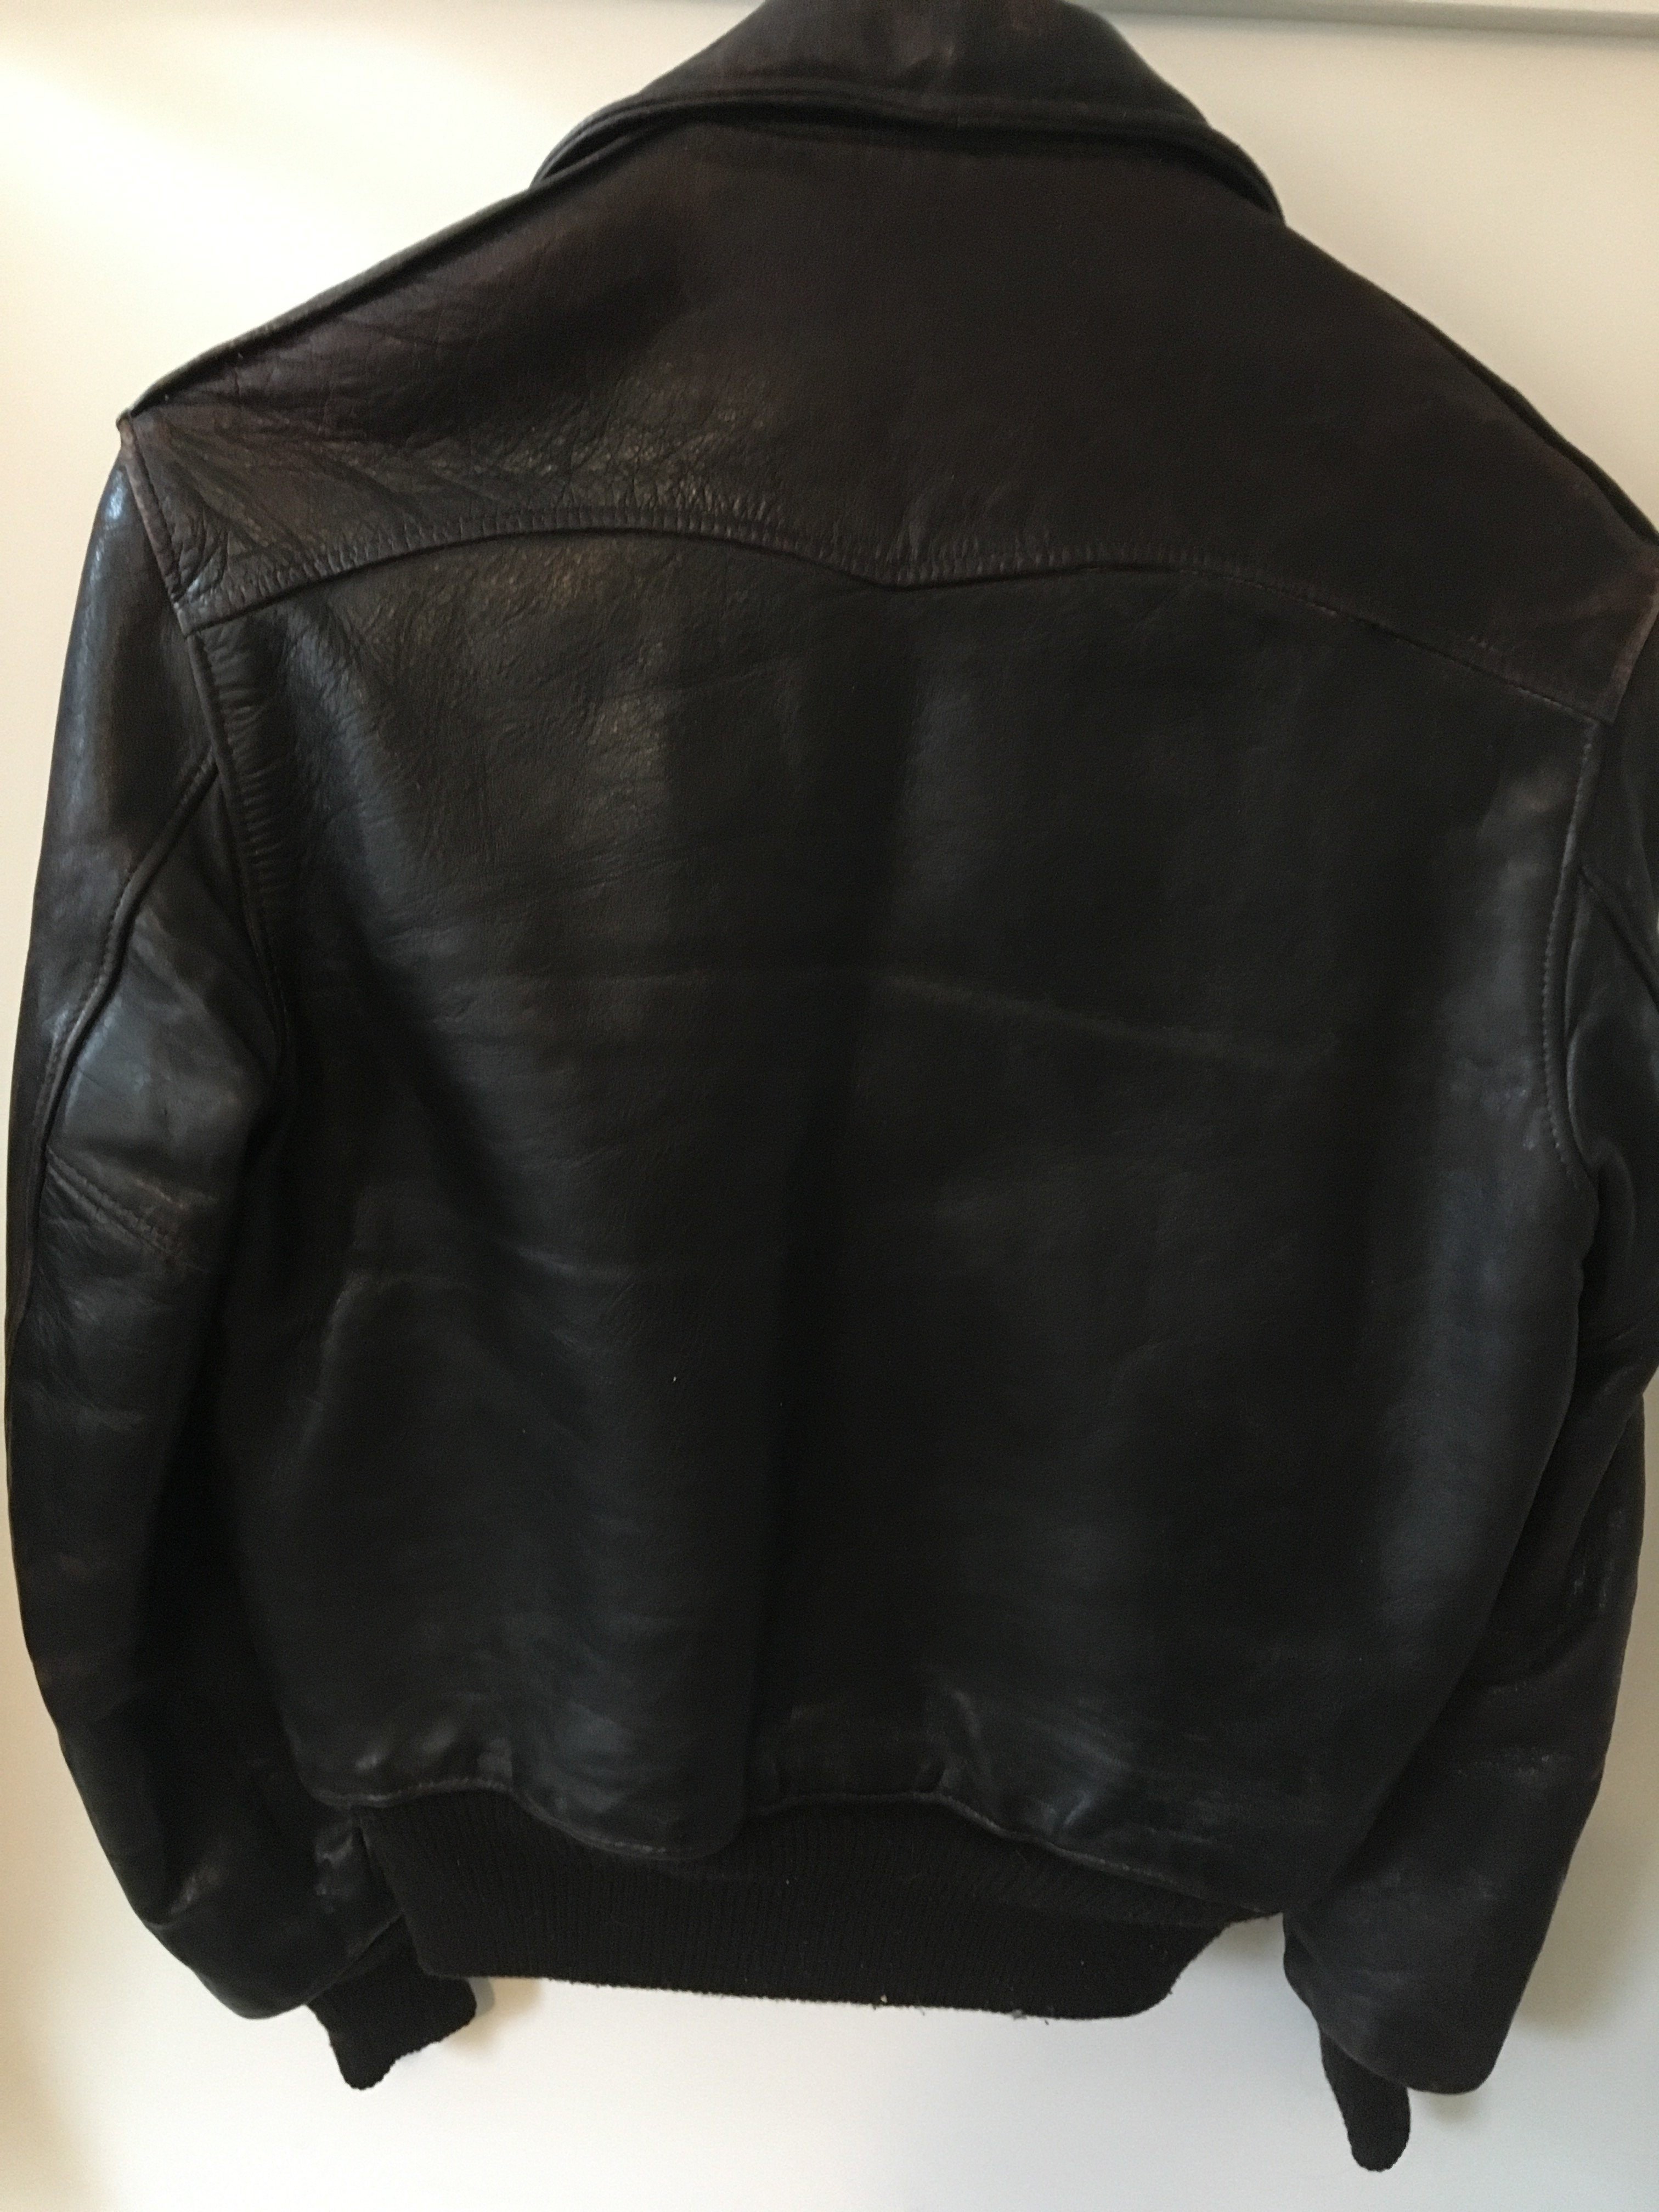 New to the forum and trying to work out the history of my old jacket ...